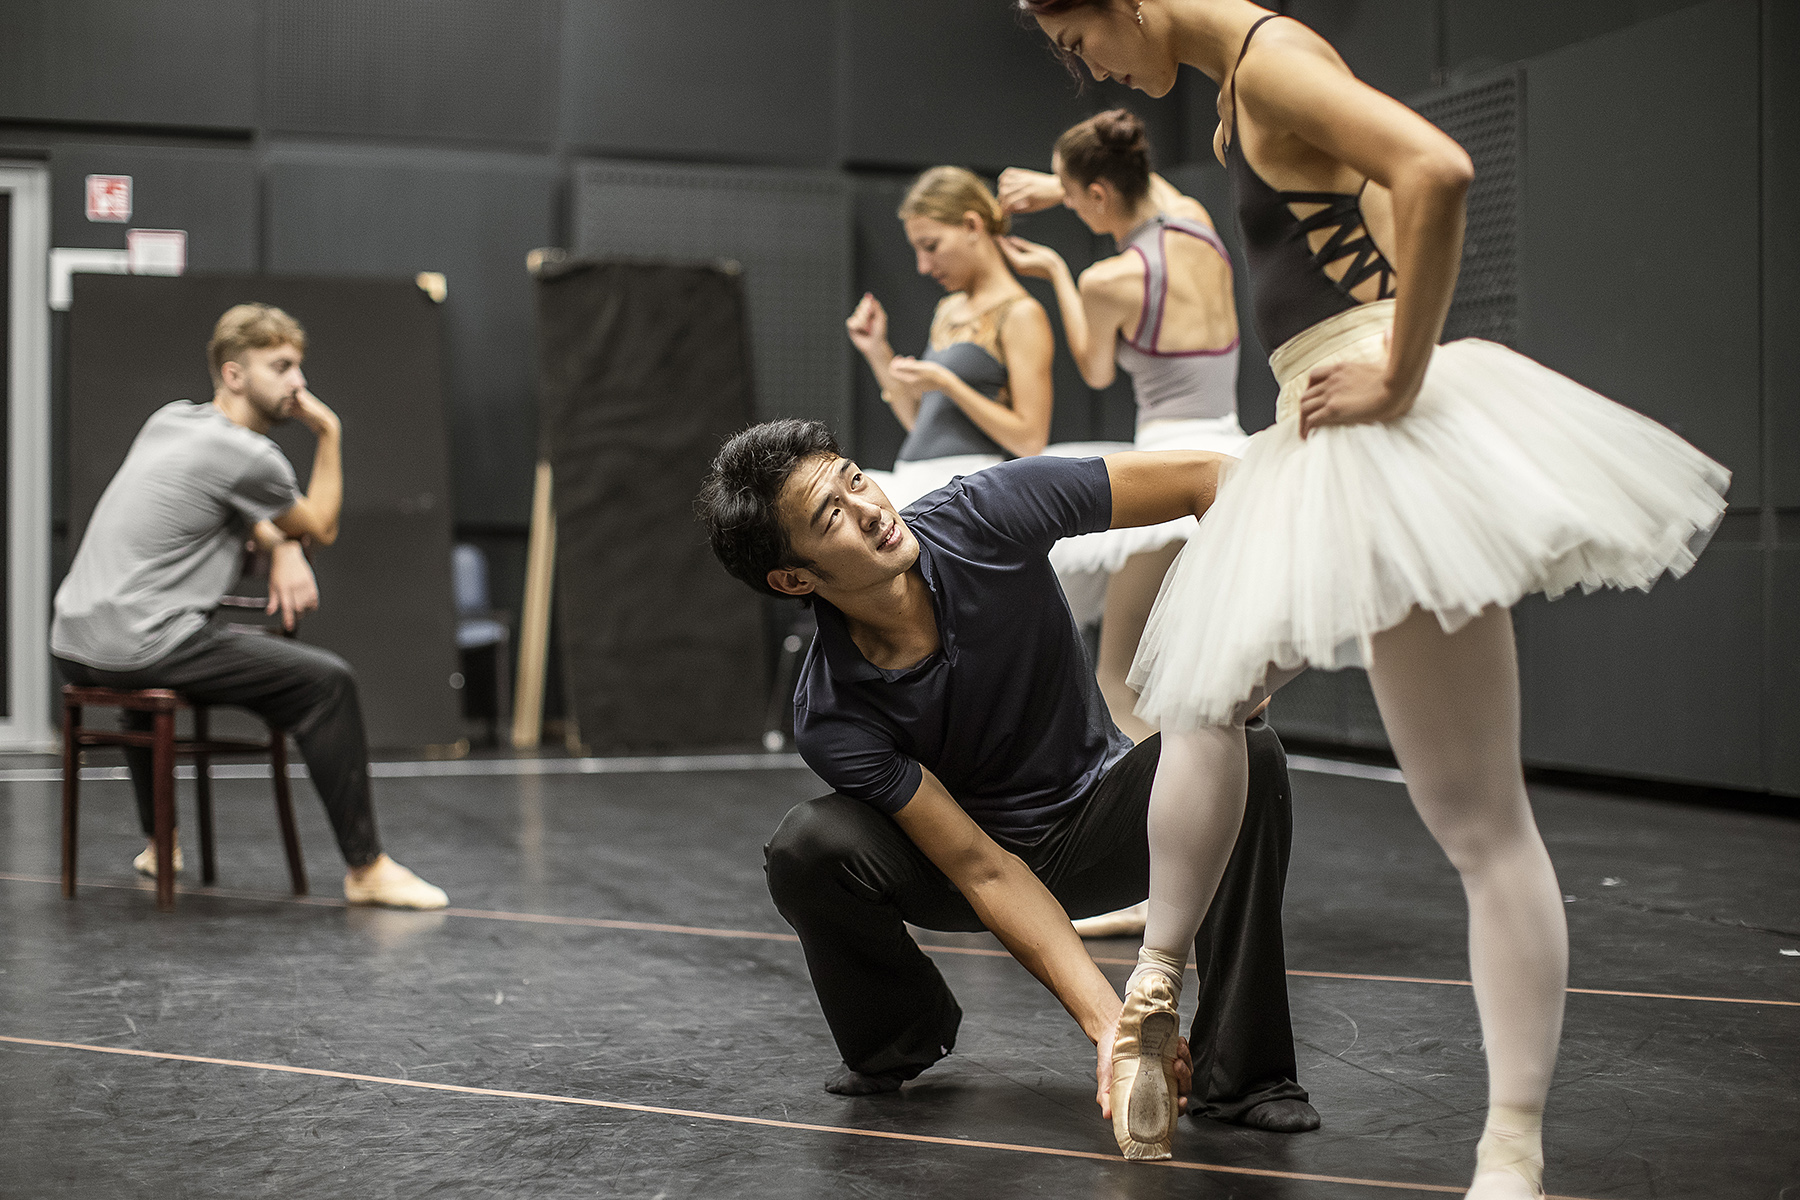 A choreographer manipulates a ballet dancer's pointed foot, standing on a black stage as they rehearse for a show on stage, with their special arts talent, they can apply for a work visa in Singapore